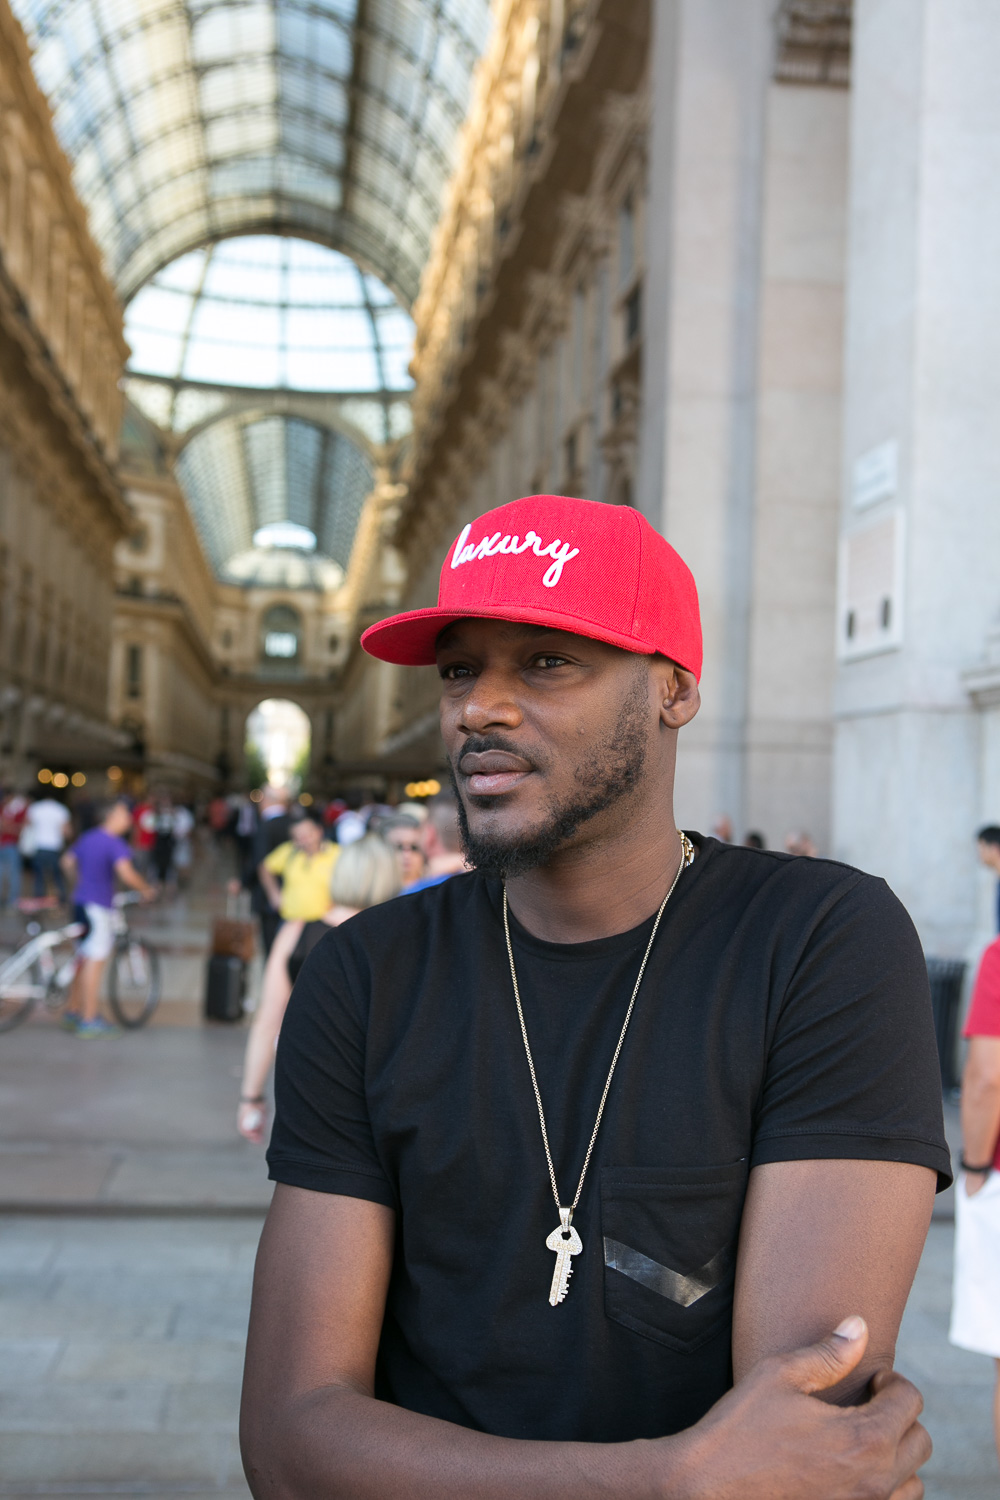 2Baba spotted Milan